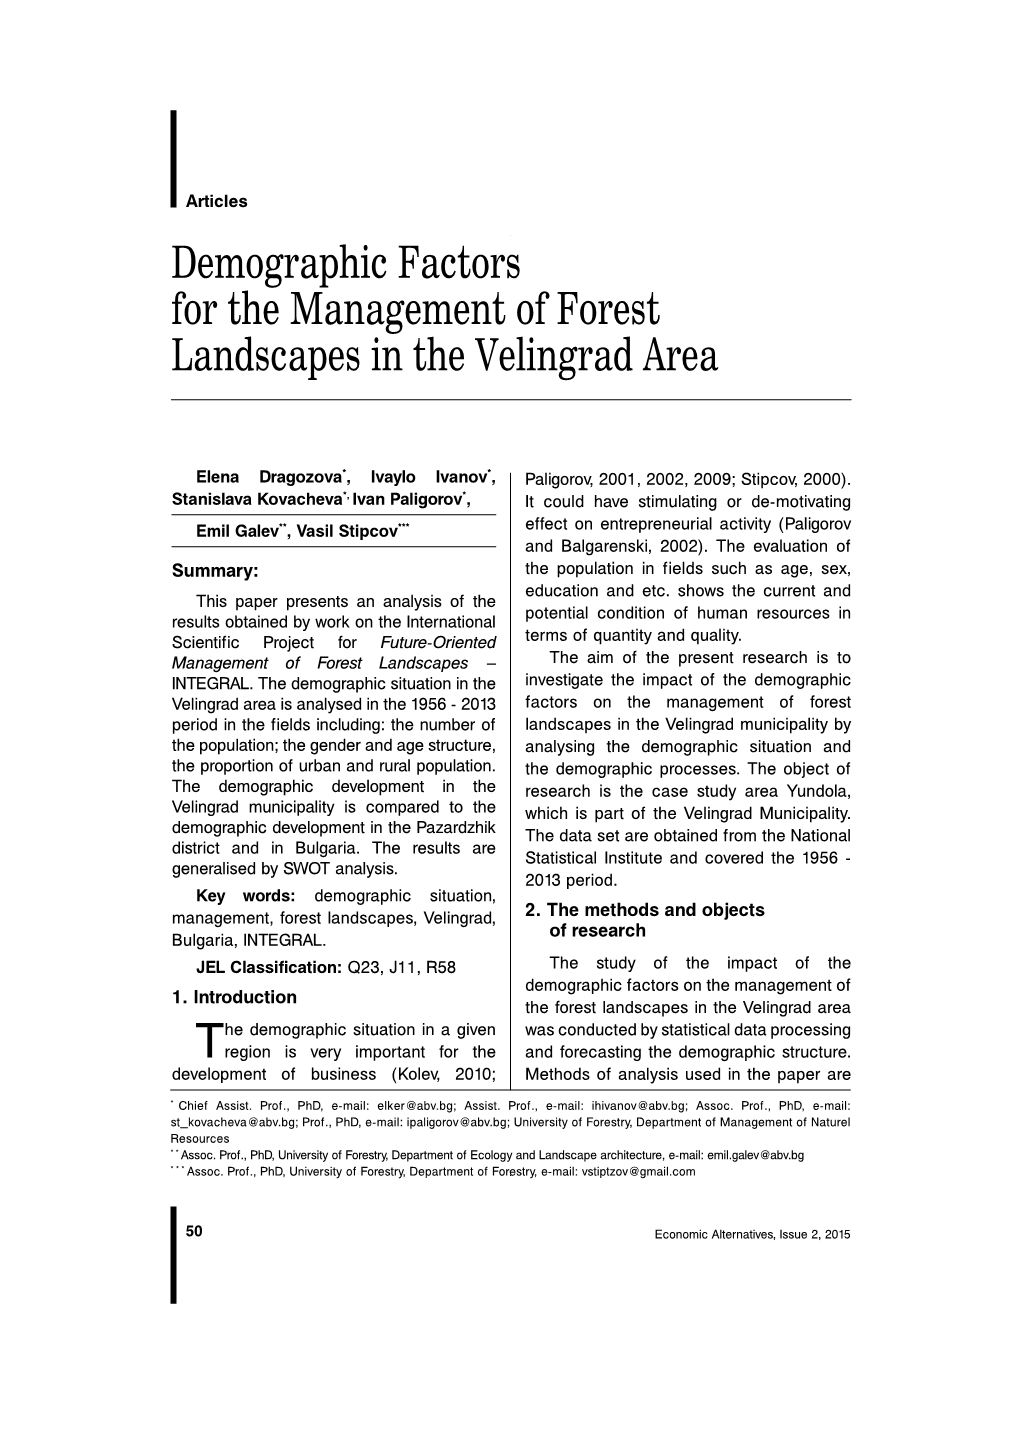 Demographic Factors for the Management of Forest Landscapes in the Velingrad Area